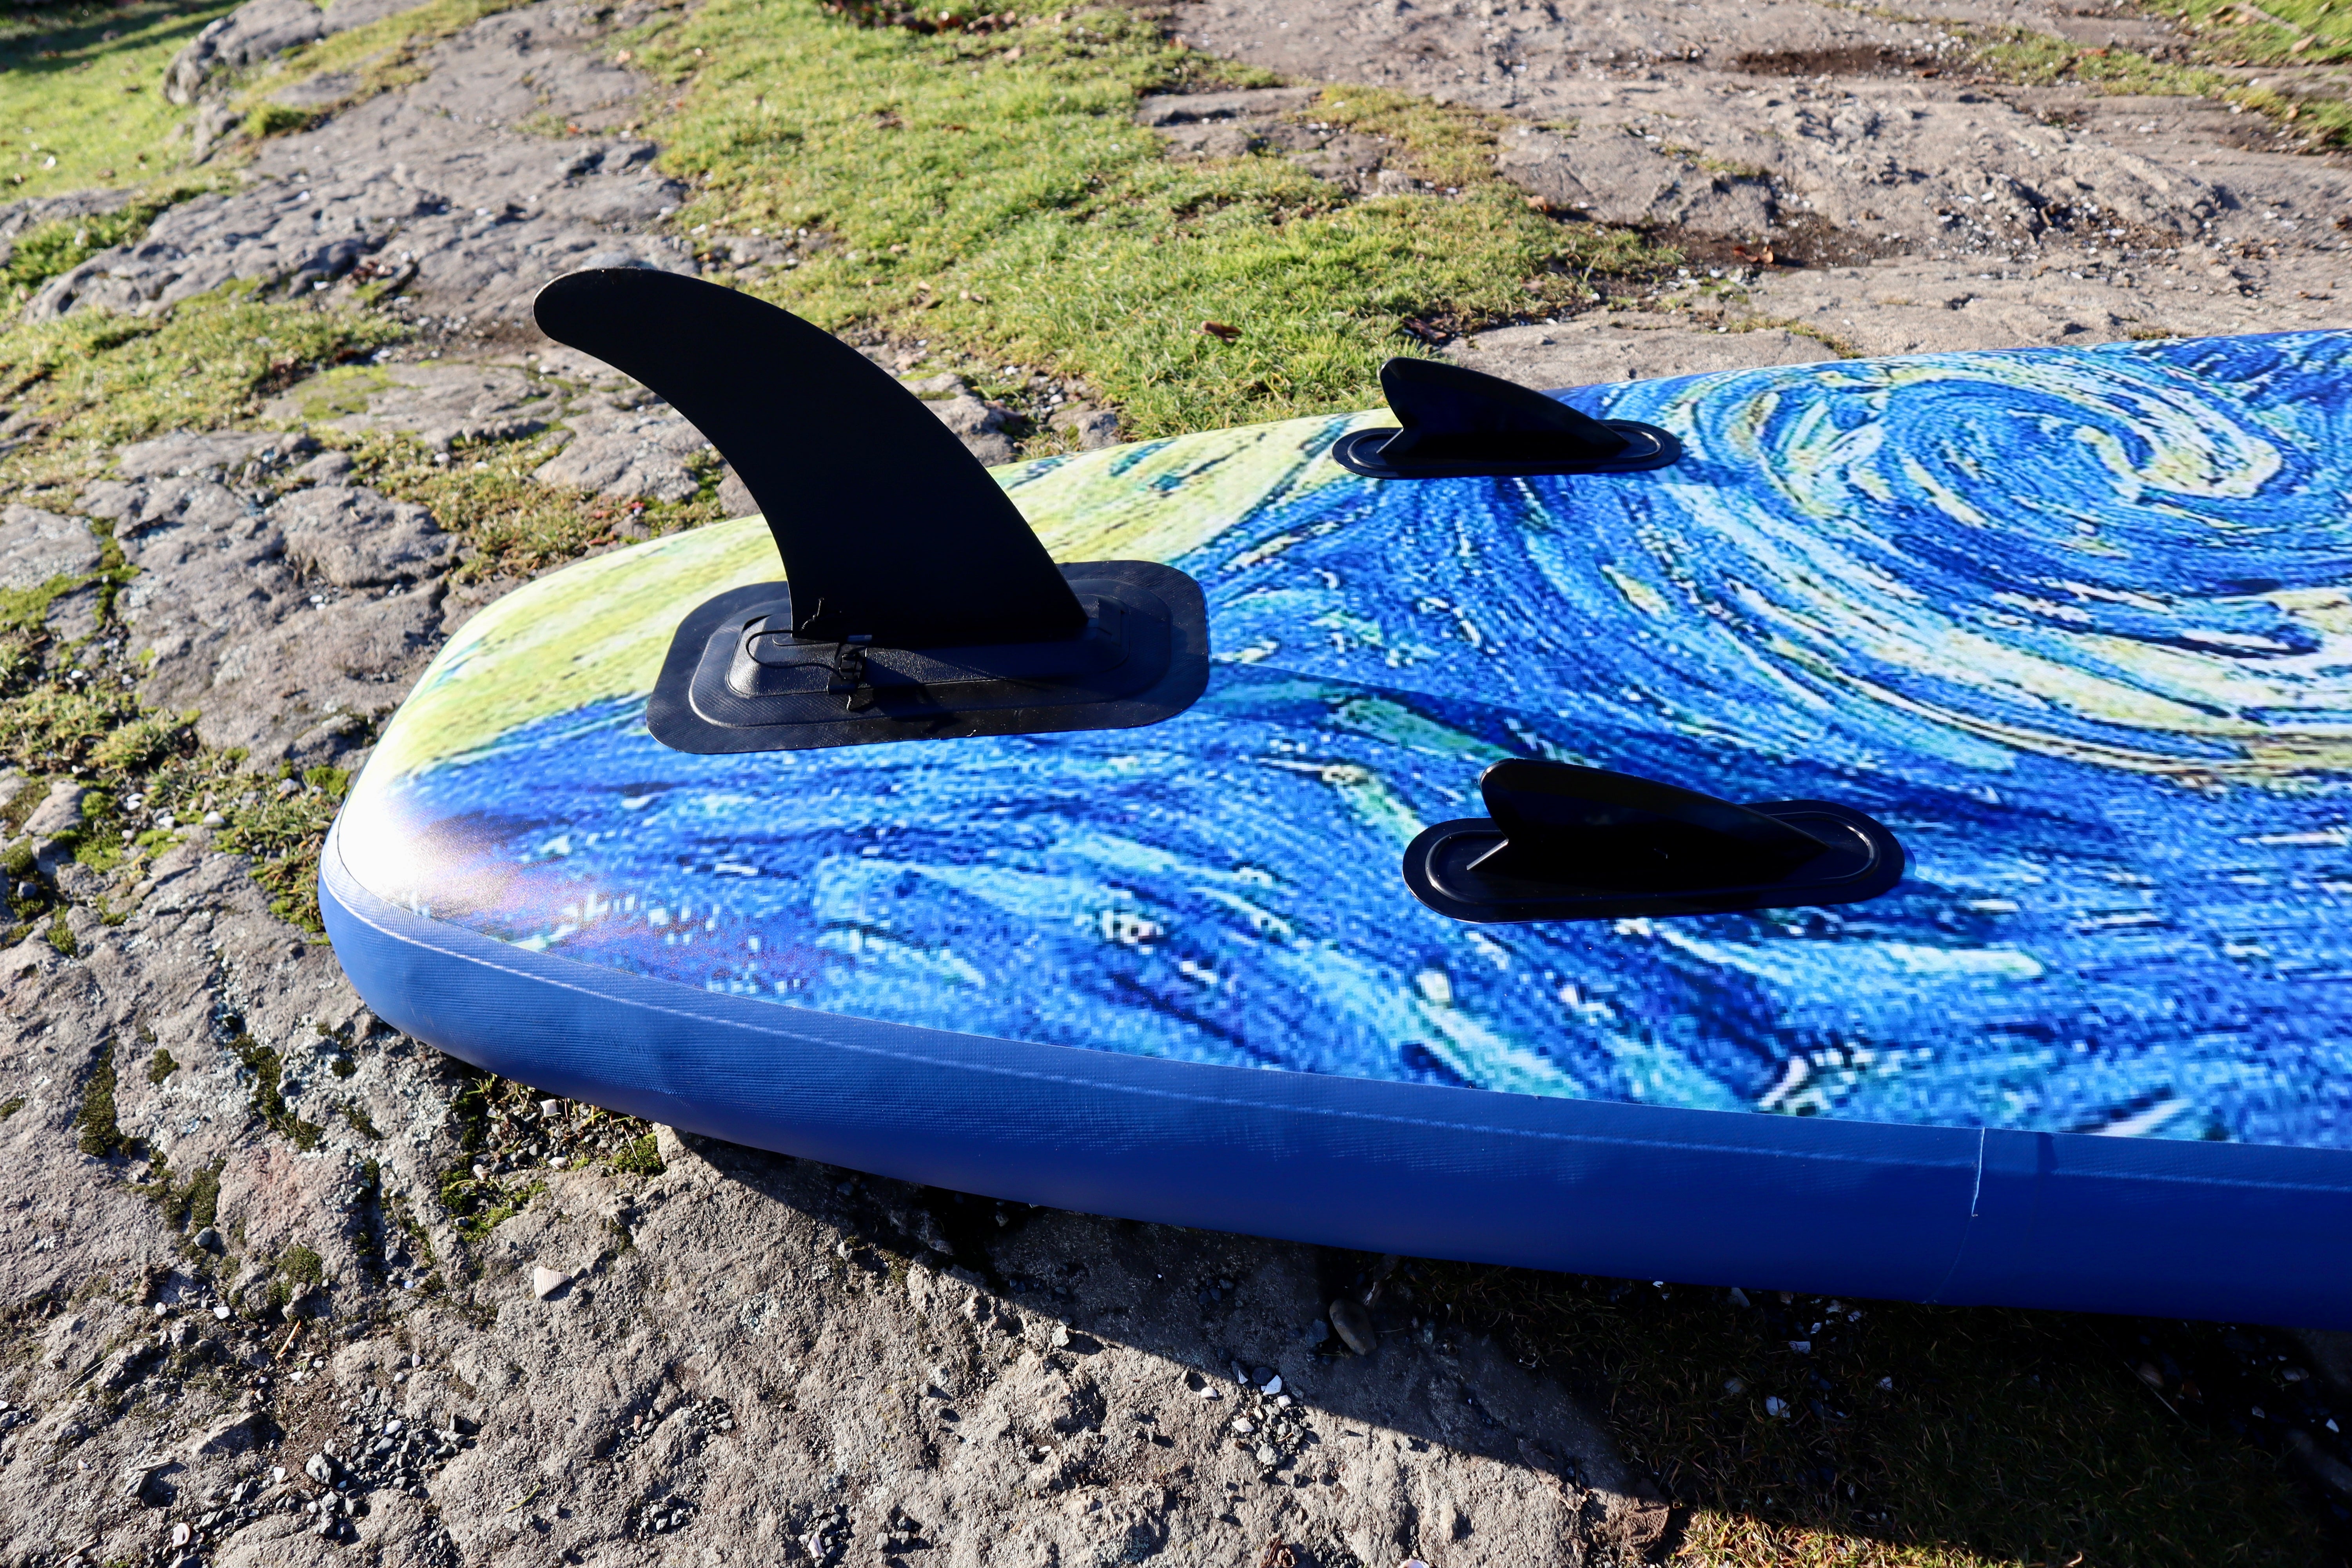 Slifeshop Van Gogh Starry Night SUP Stand Up Paddle Board SUP  Inflatable SUP Designed by Local Canadian Artist 10’6” & 11’